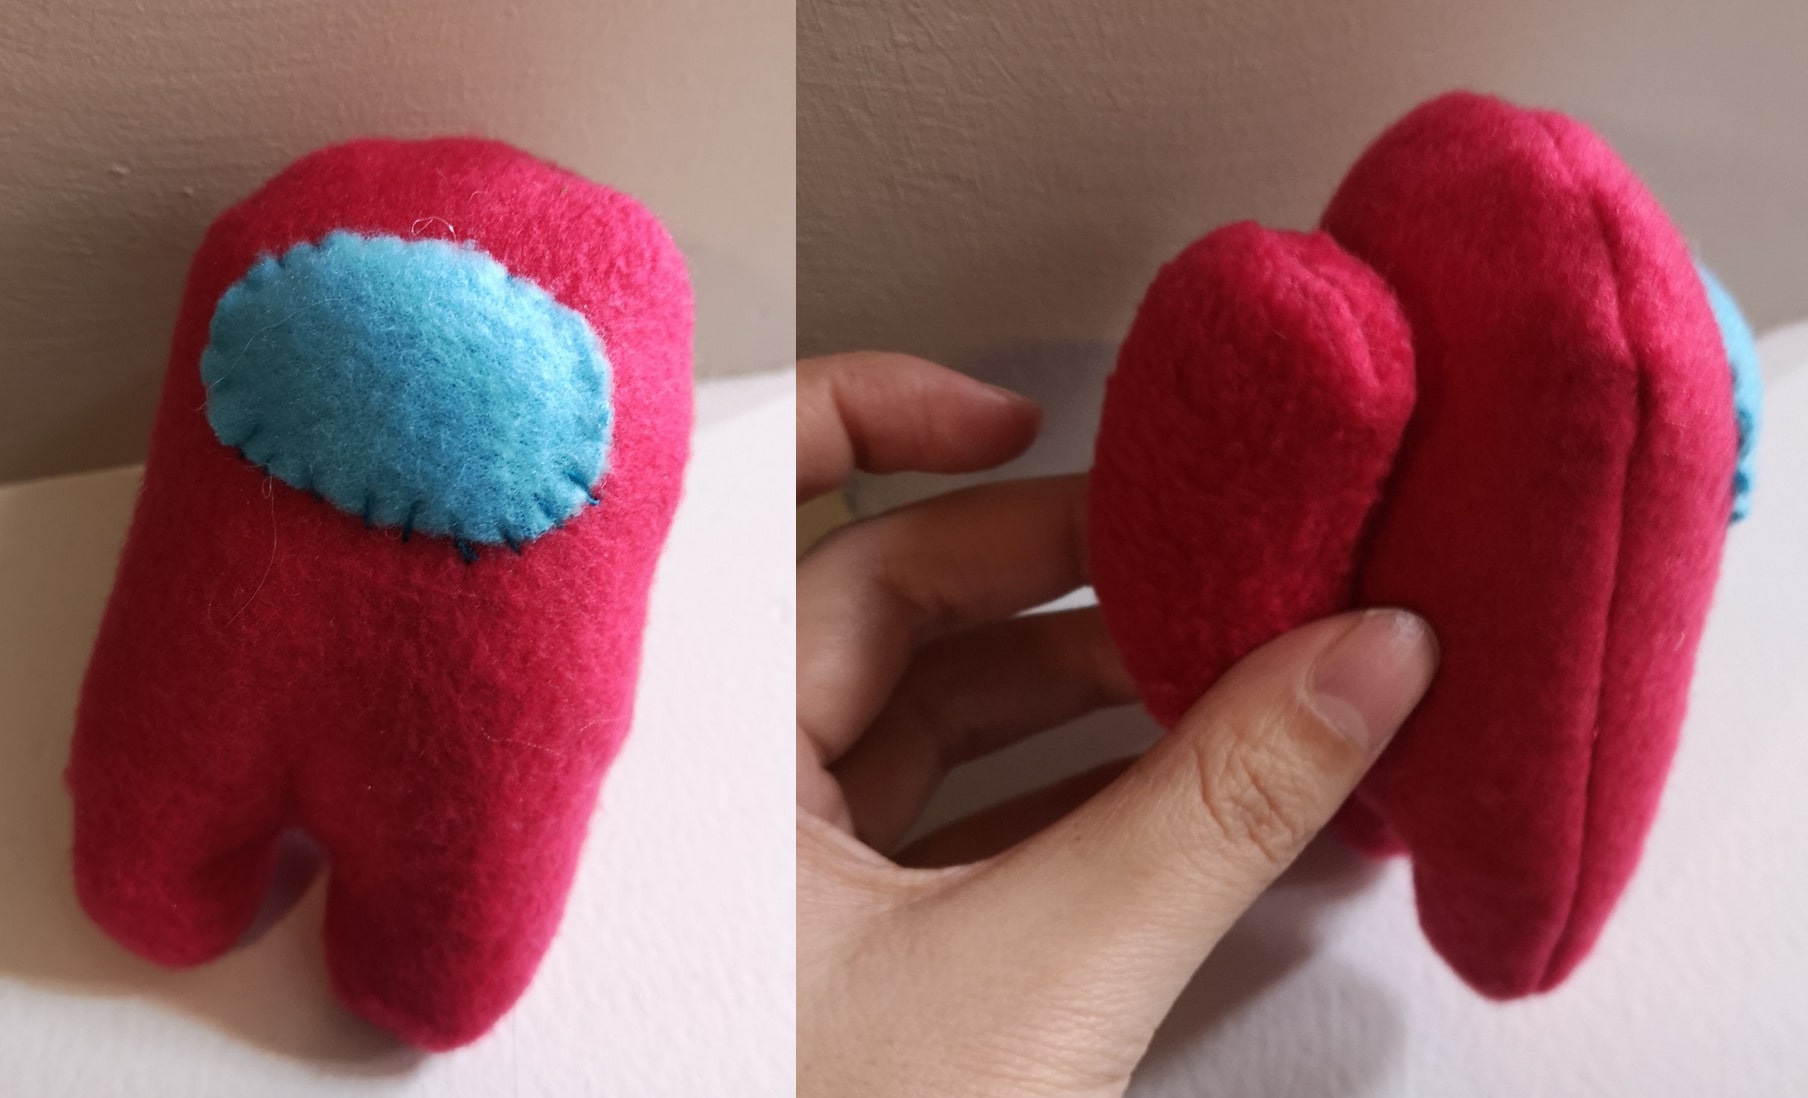 two shots showing the front and back of a red Among Us character plush